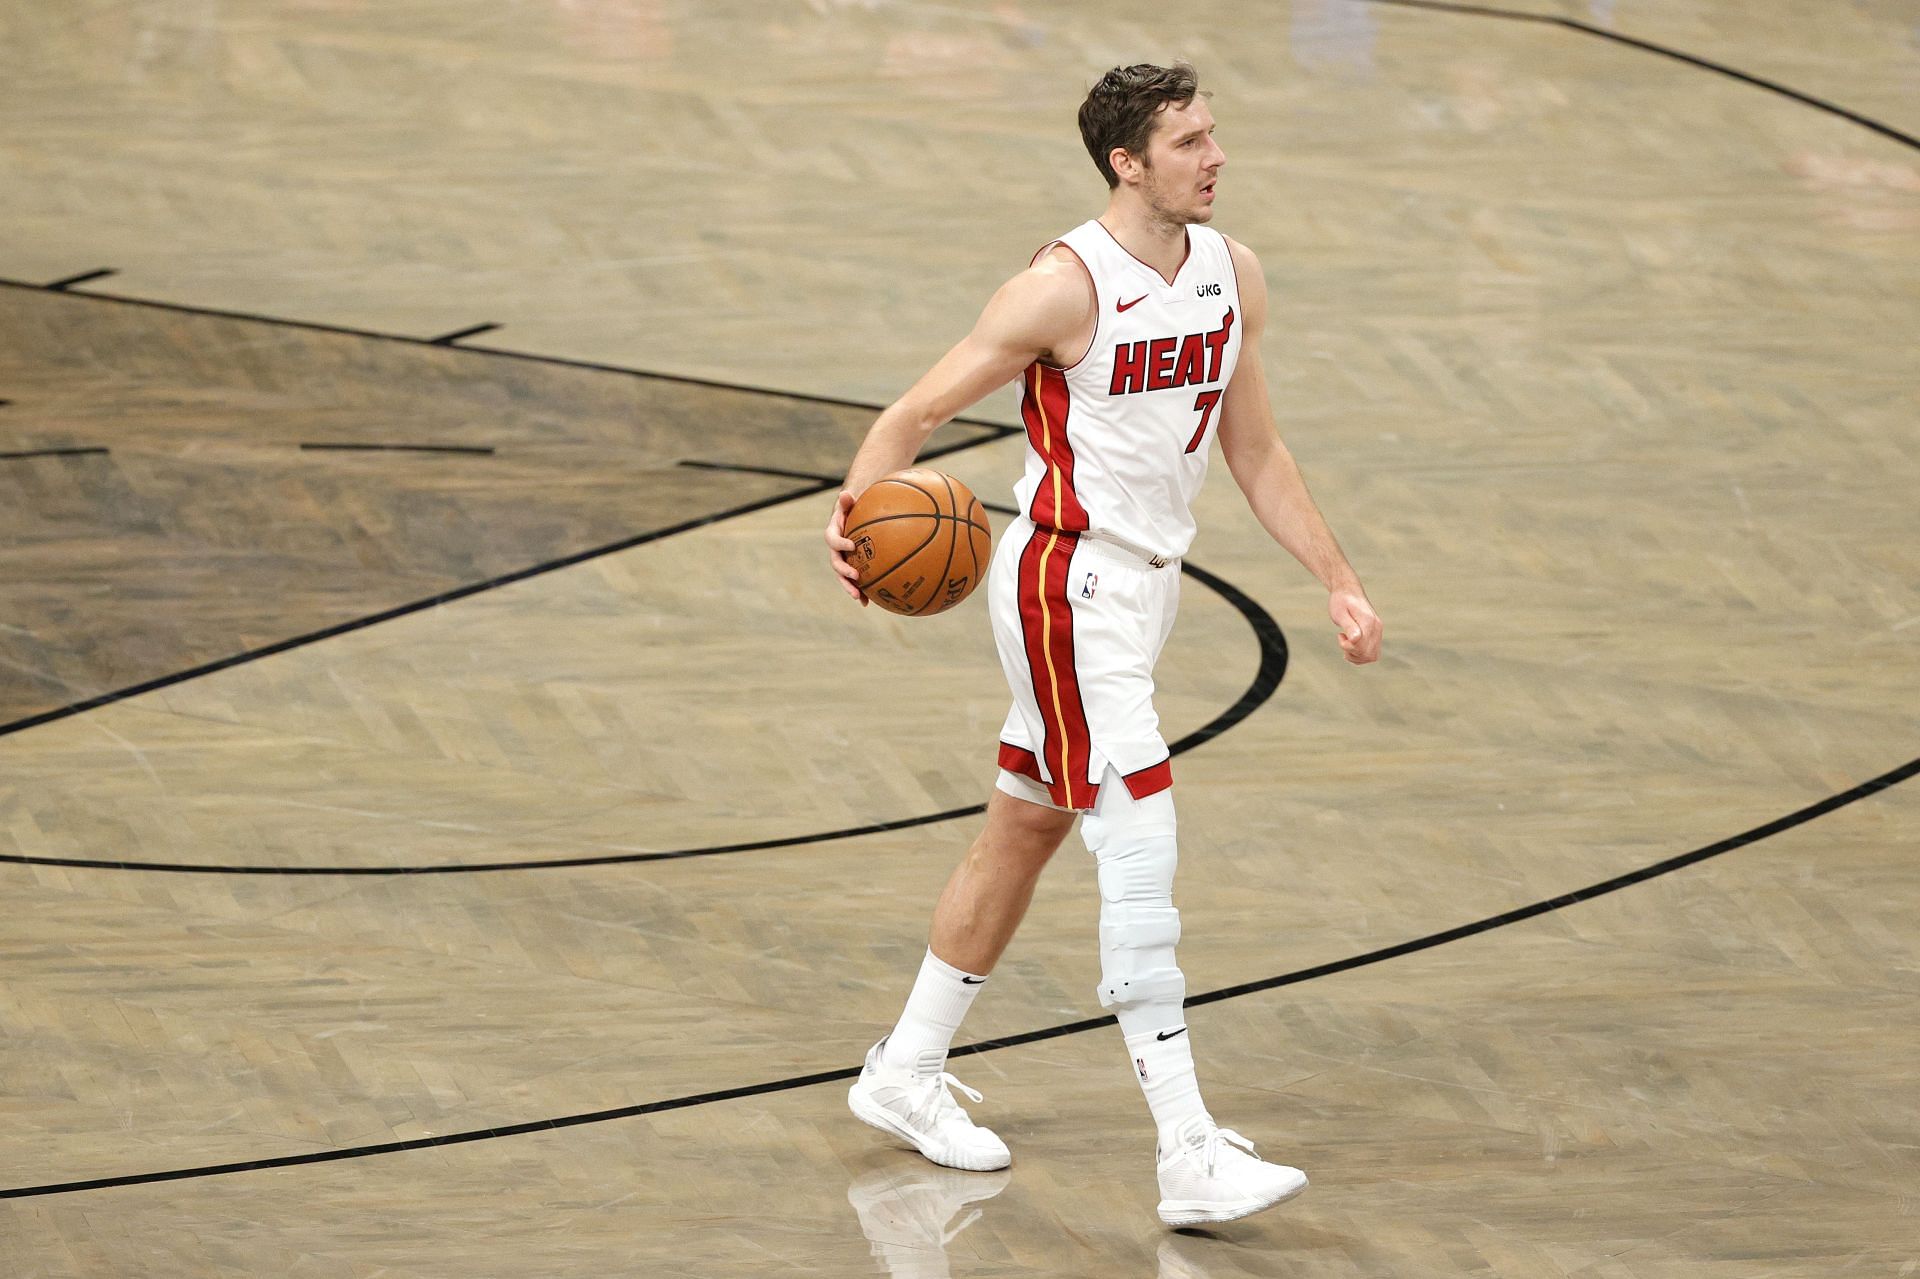 Goran Dragic #7 of the Miami Heat dribbles during the first half against the Brooklyn Nets.